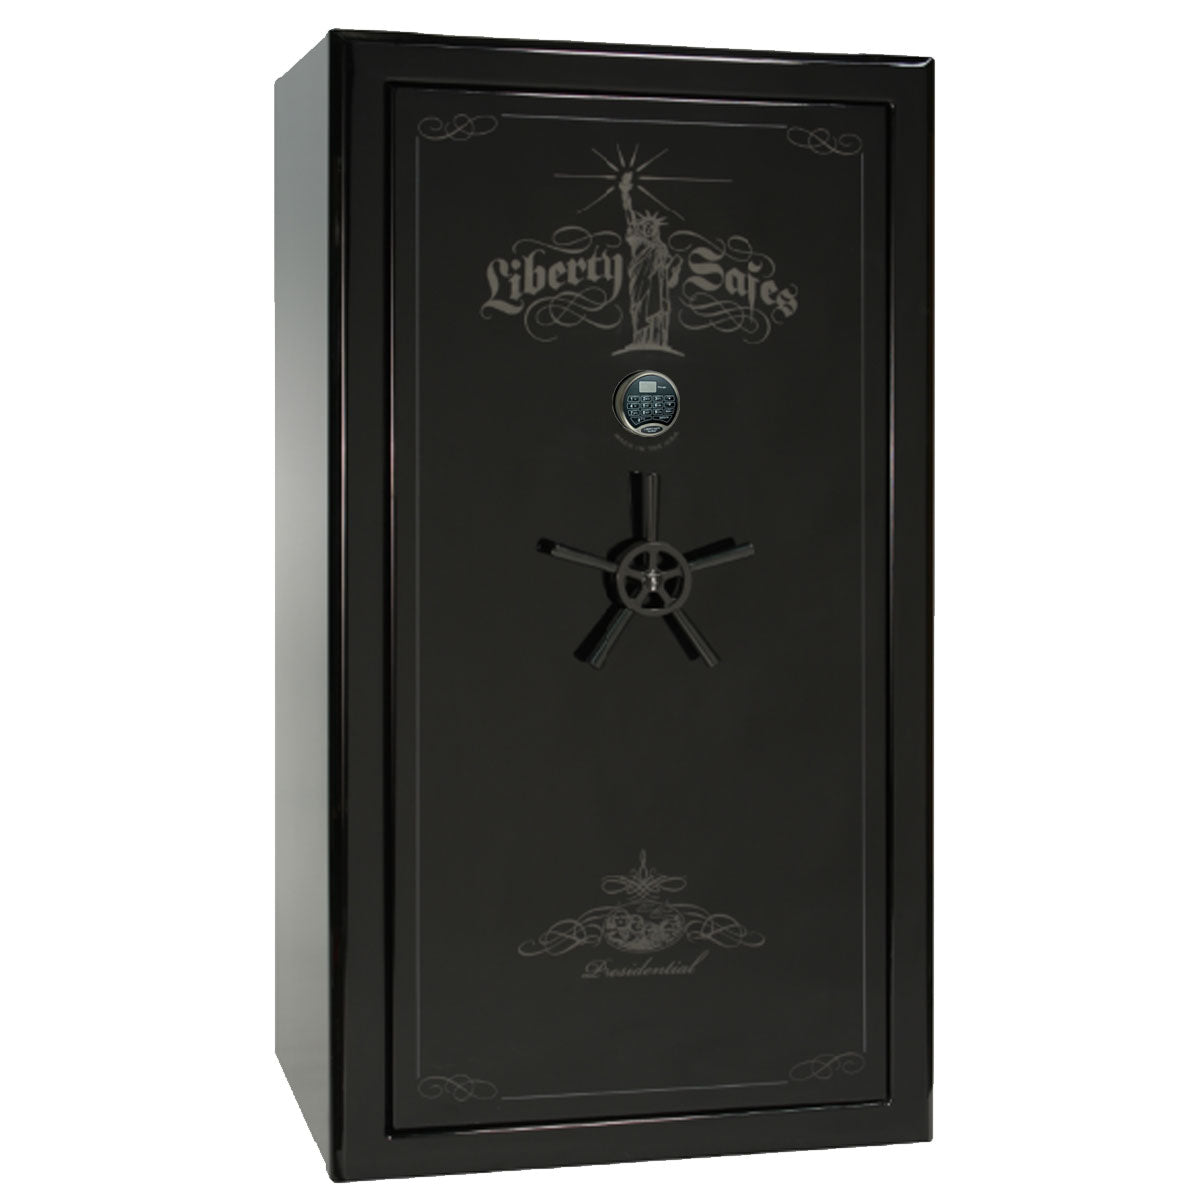 Liberty Safe Presidential 40 in Black Gloss with Black Chrome Electronic Lock, closed door.